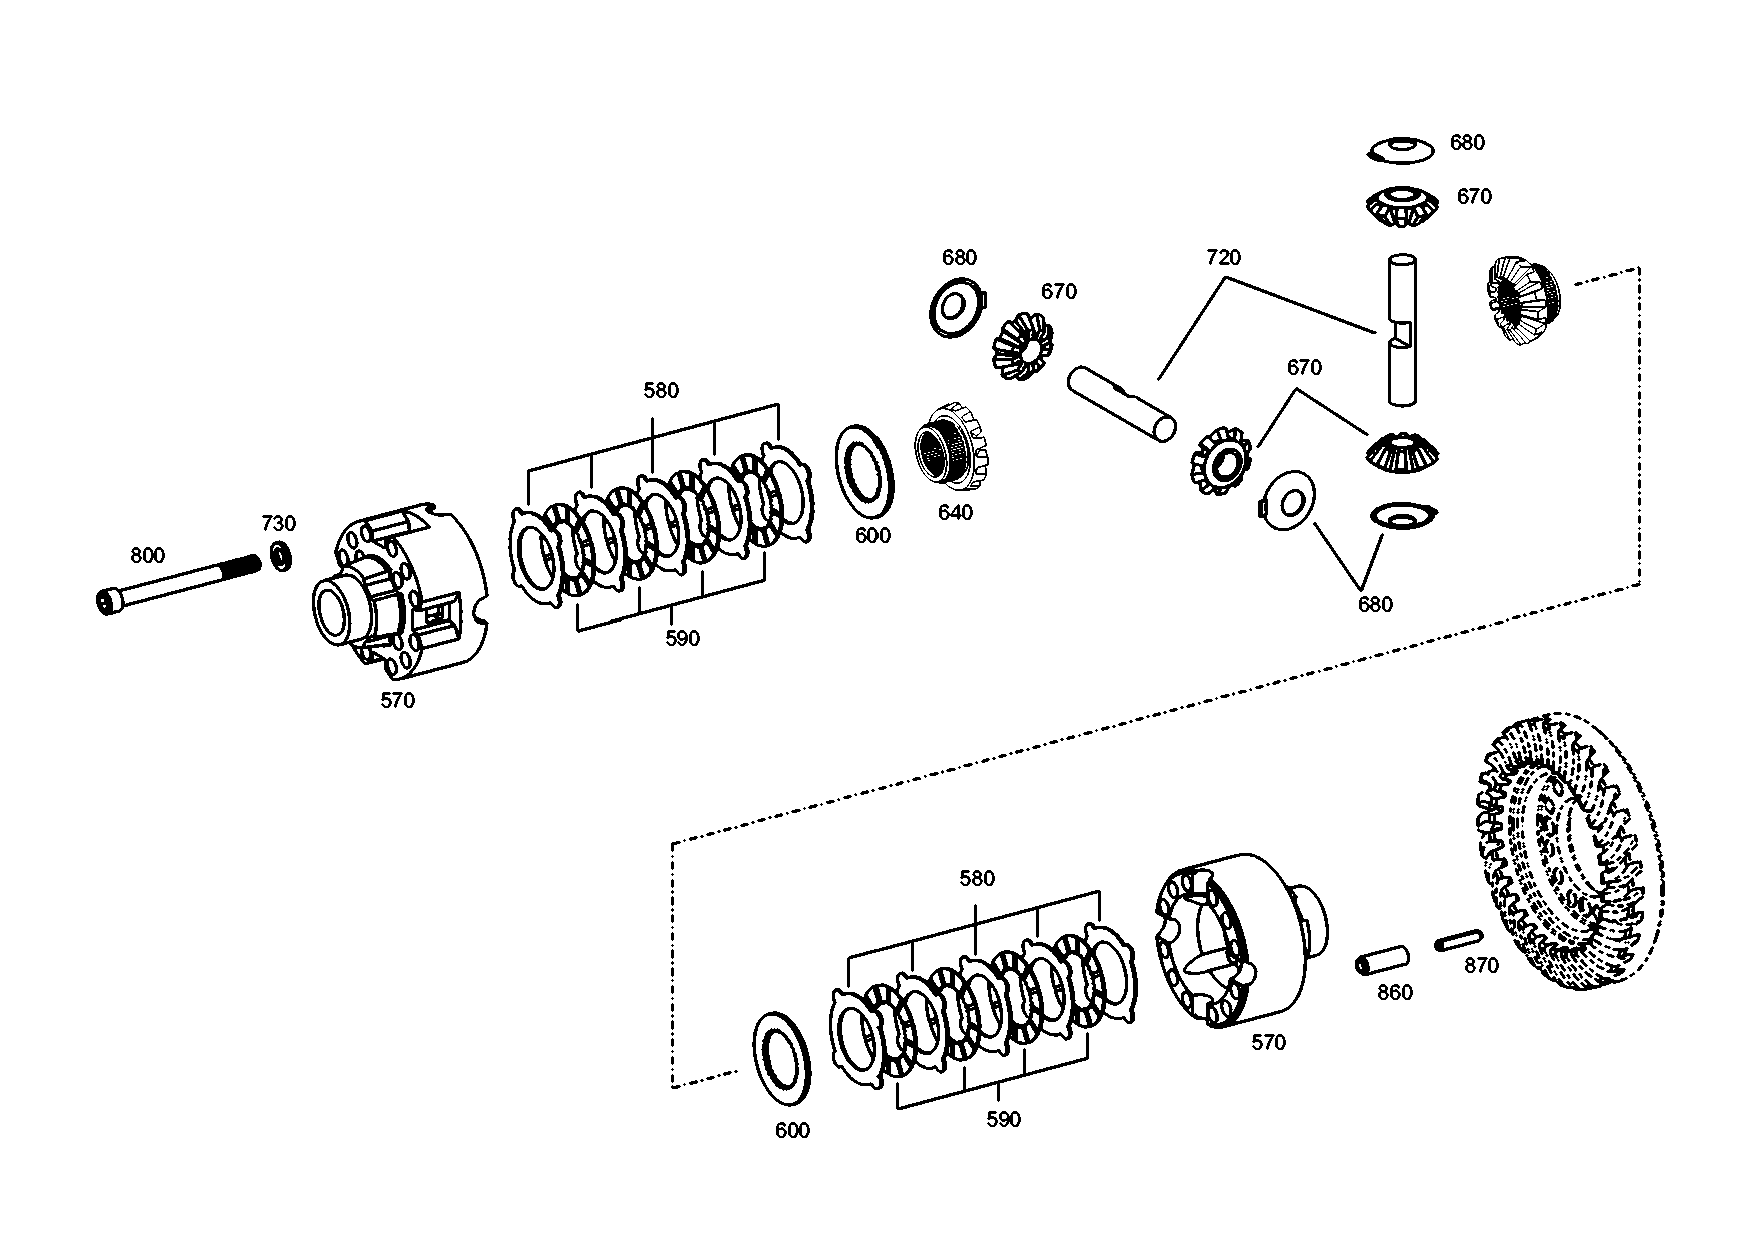 drawing for CATERPILLAR INC. 128-7855 - DIFFERENTIAL BEVEL GEAR (figure 5)